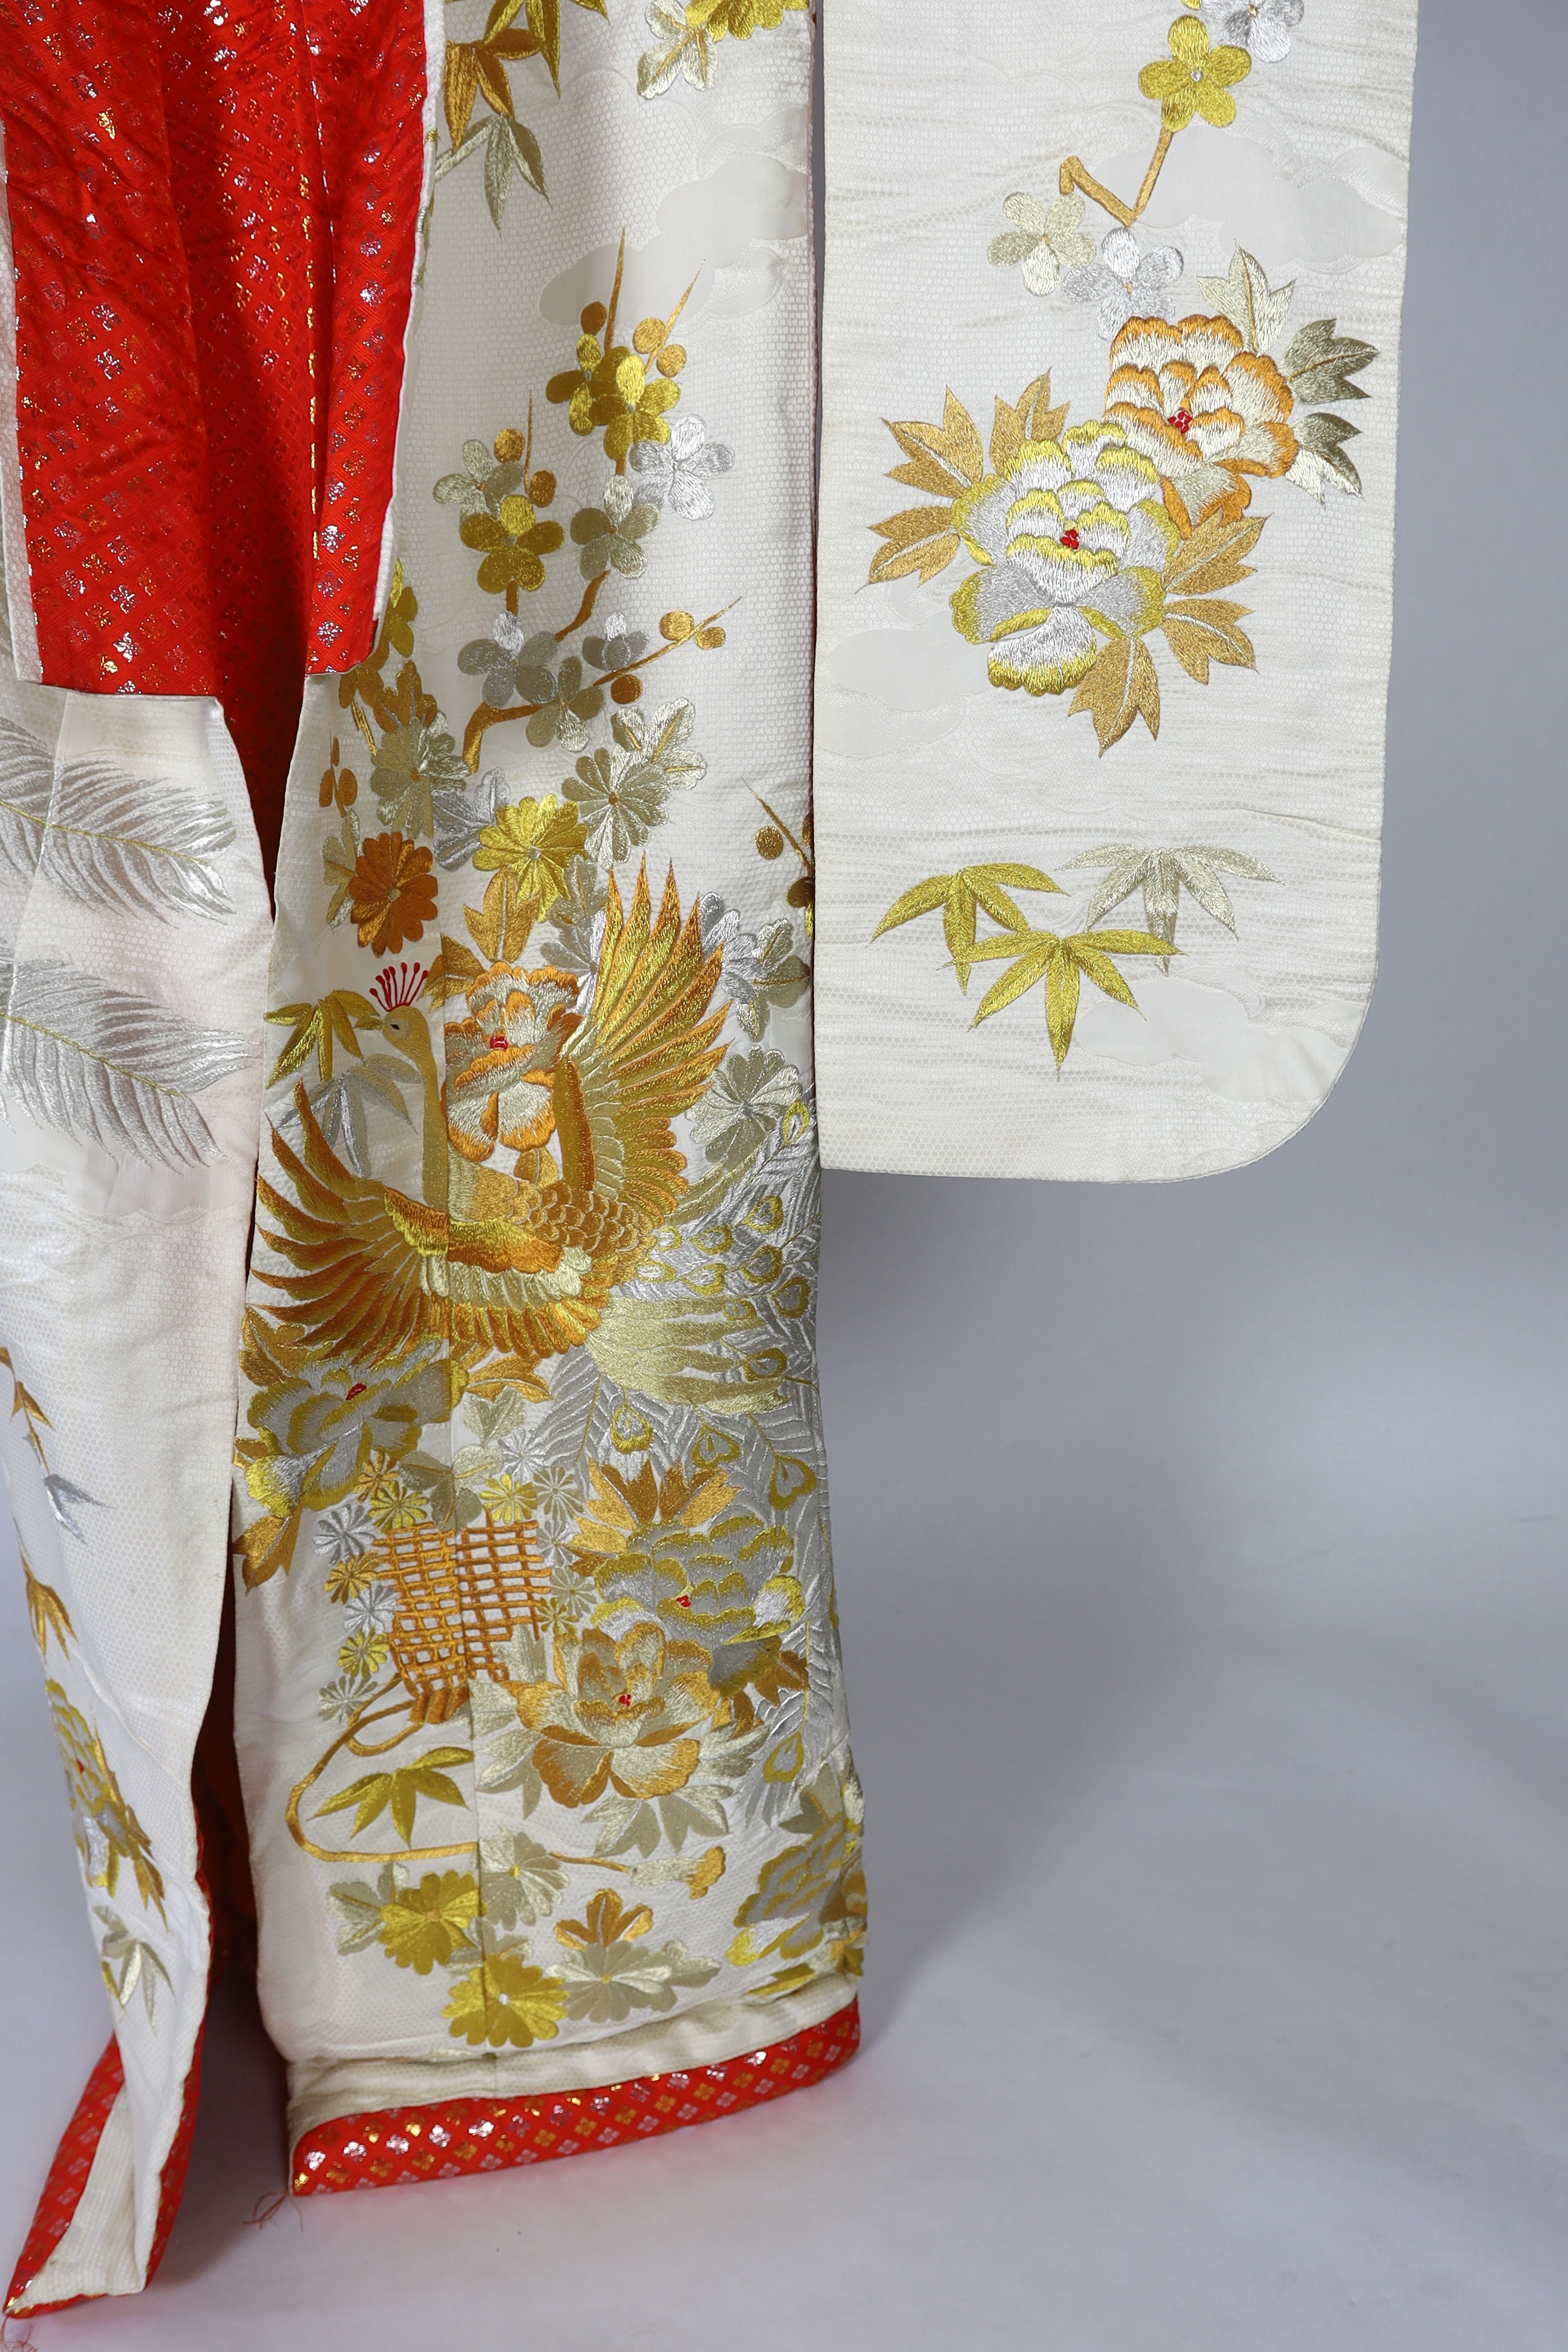 A 1960s-70s vintage Japanese embroidered wedding kimono, embroidered with pewter, bronze, silver and gold coloured metallic threads, into a large decorative design of peacocks with fanned tail feathers and trailing flowe